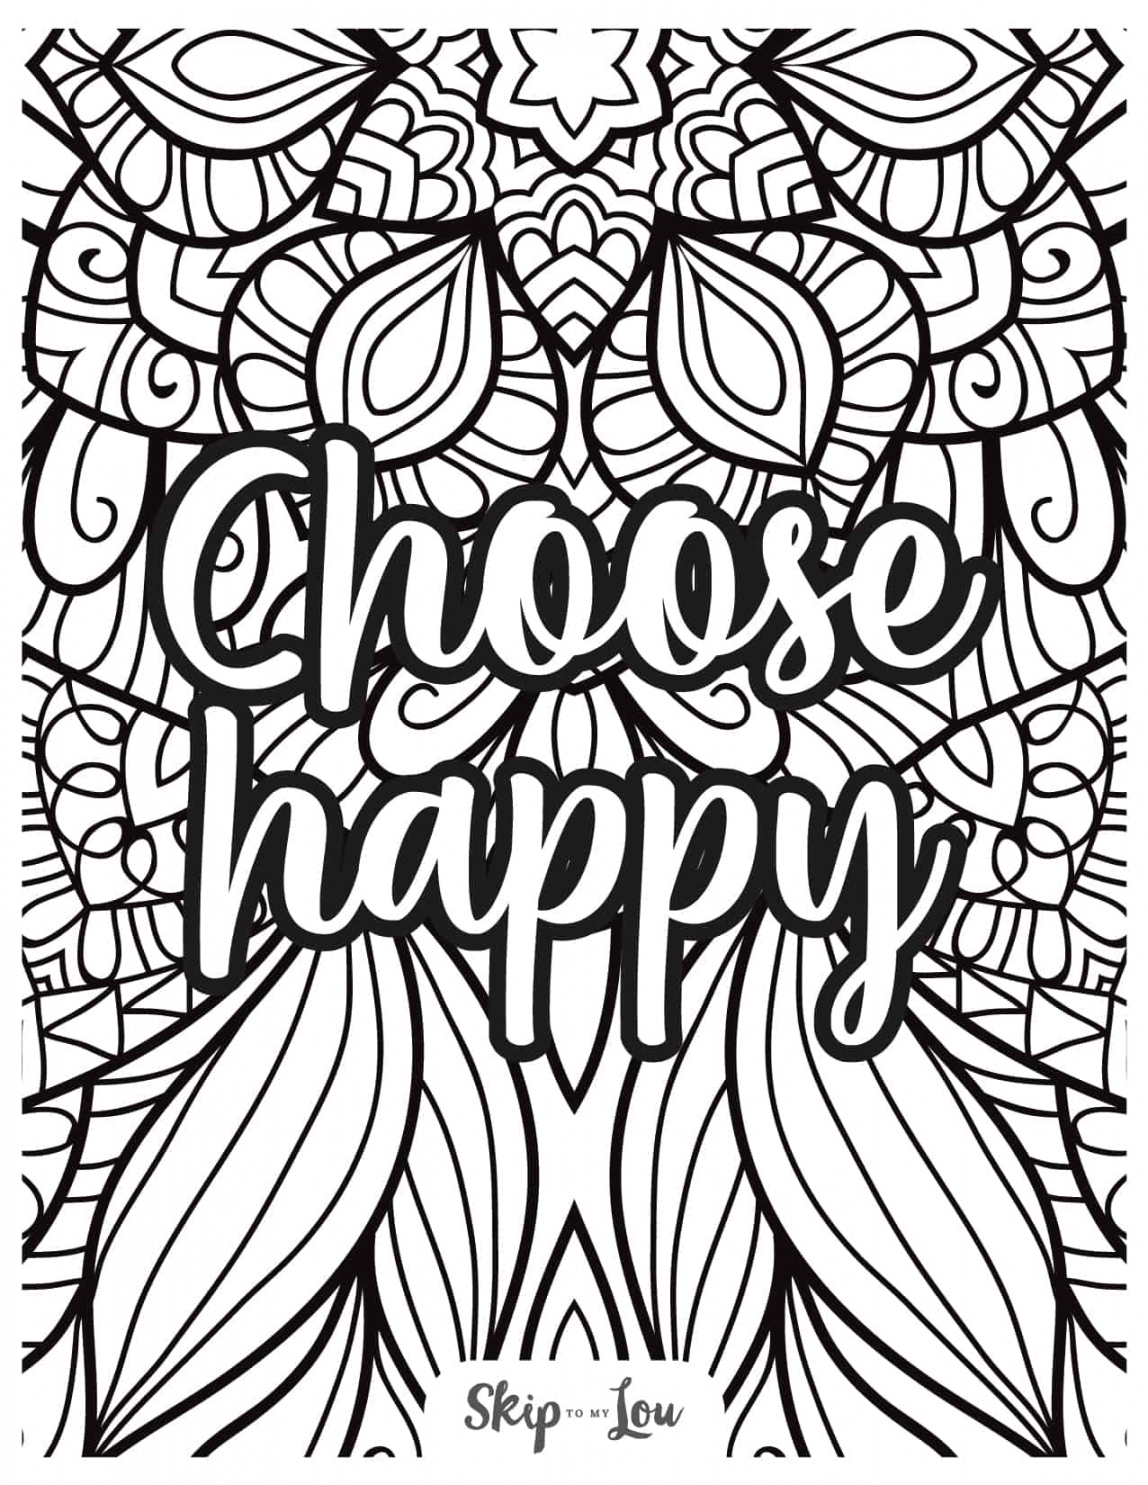 Free Coloring Pages Printable - Printable - Free Coloring Pages For Adults  Skip To My Lou